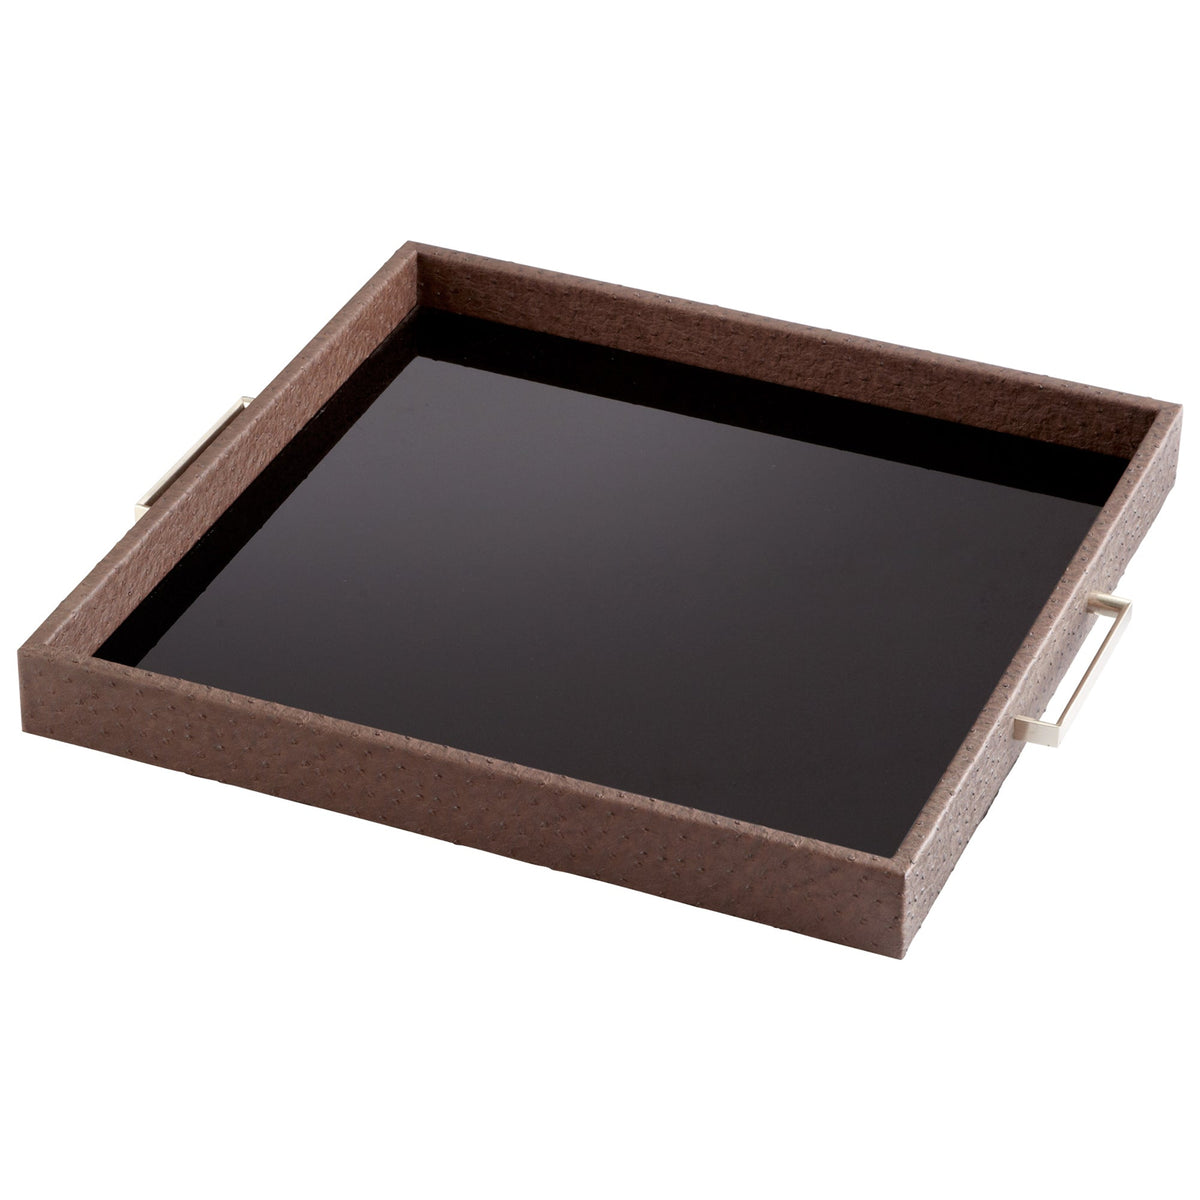 Chelsea Tray|Brown-Large by Cyan